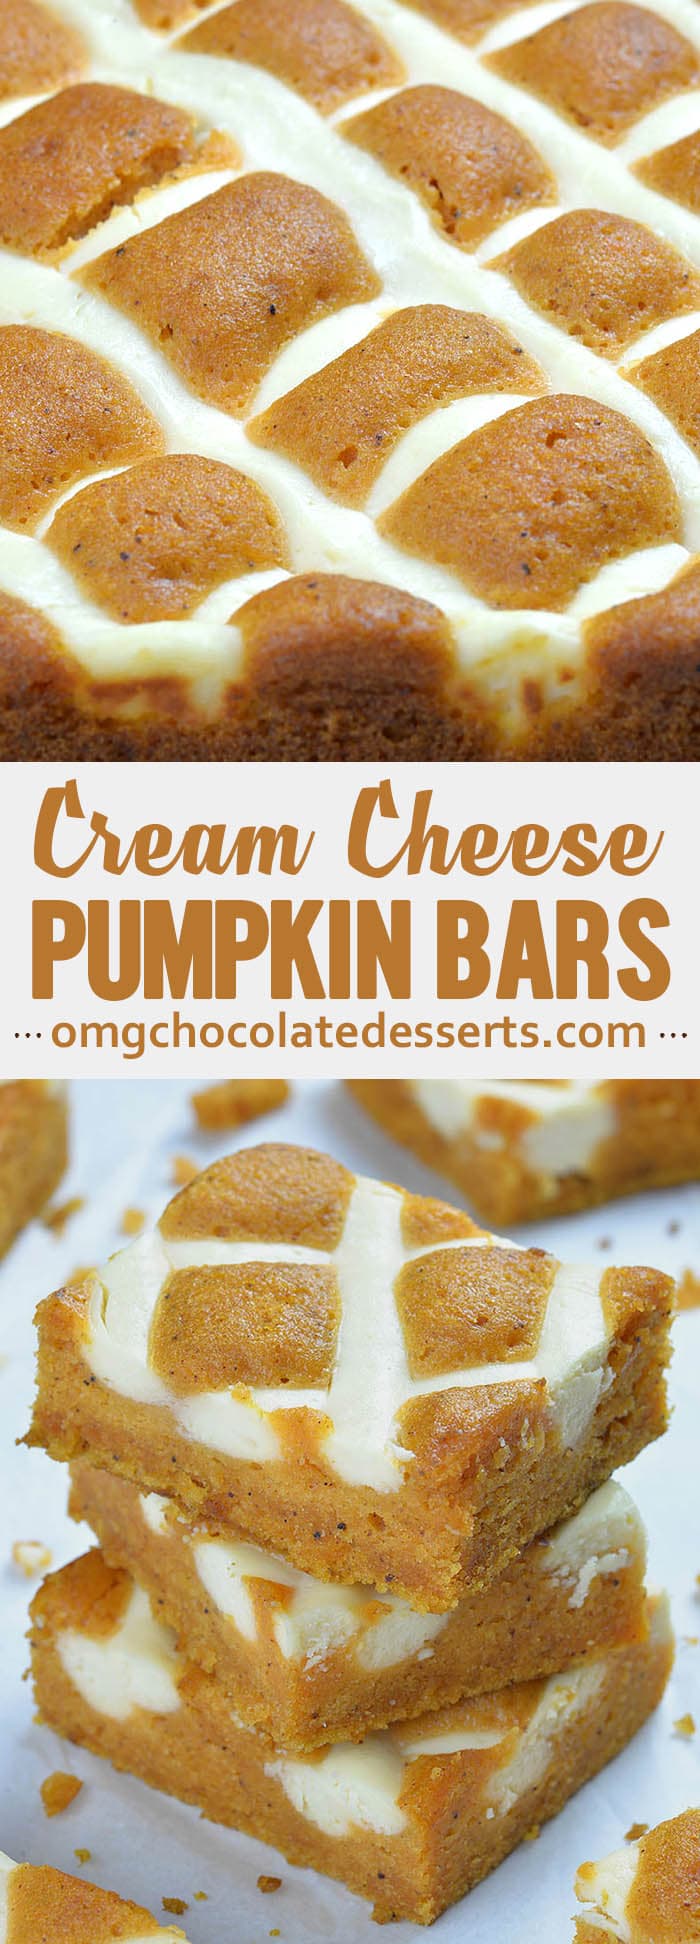 Pumpkin Bars with Cream Cheese are irresistible fall treat! It will be your new favorite and the only fall dessert you need!